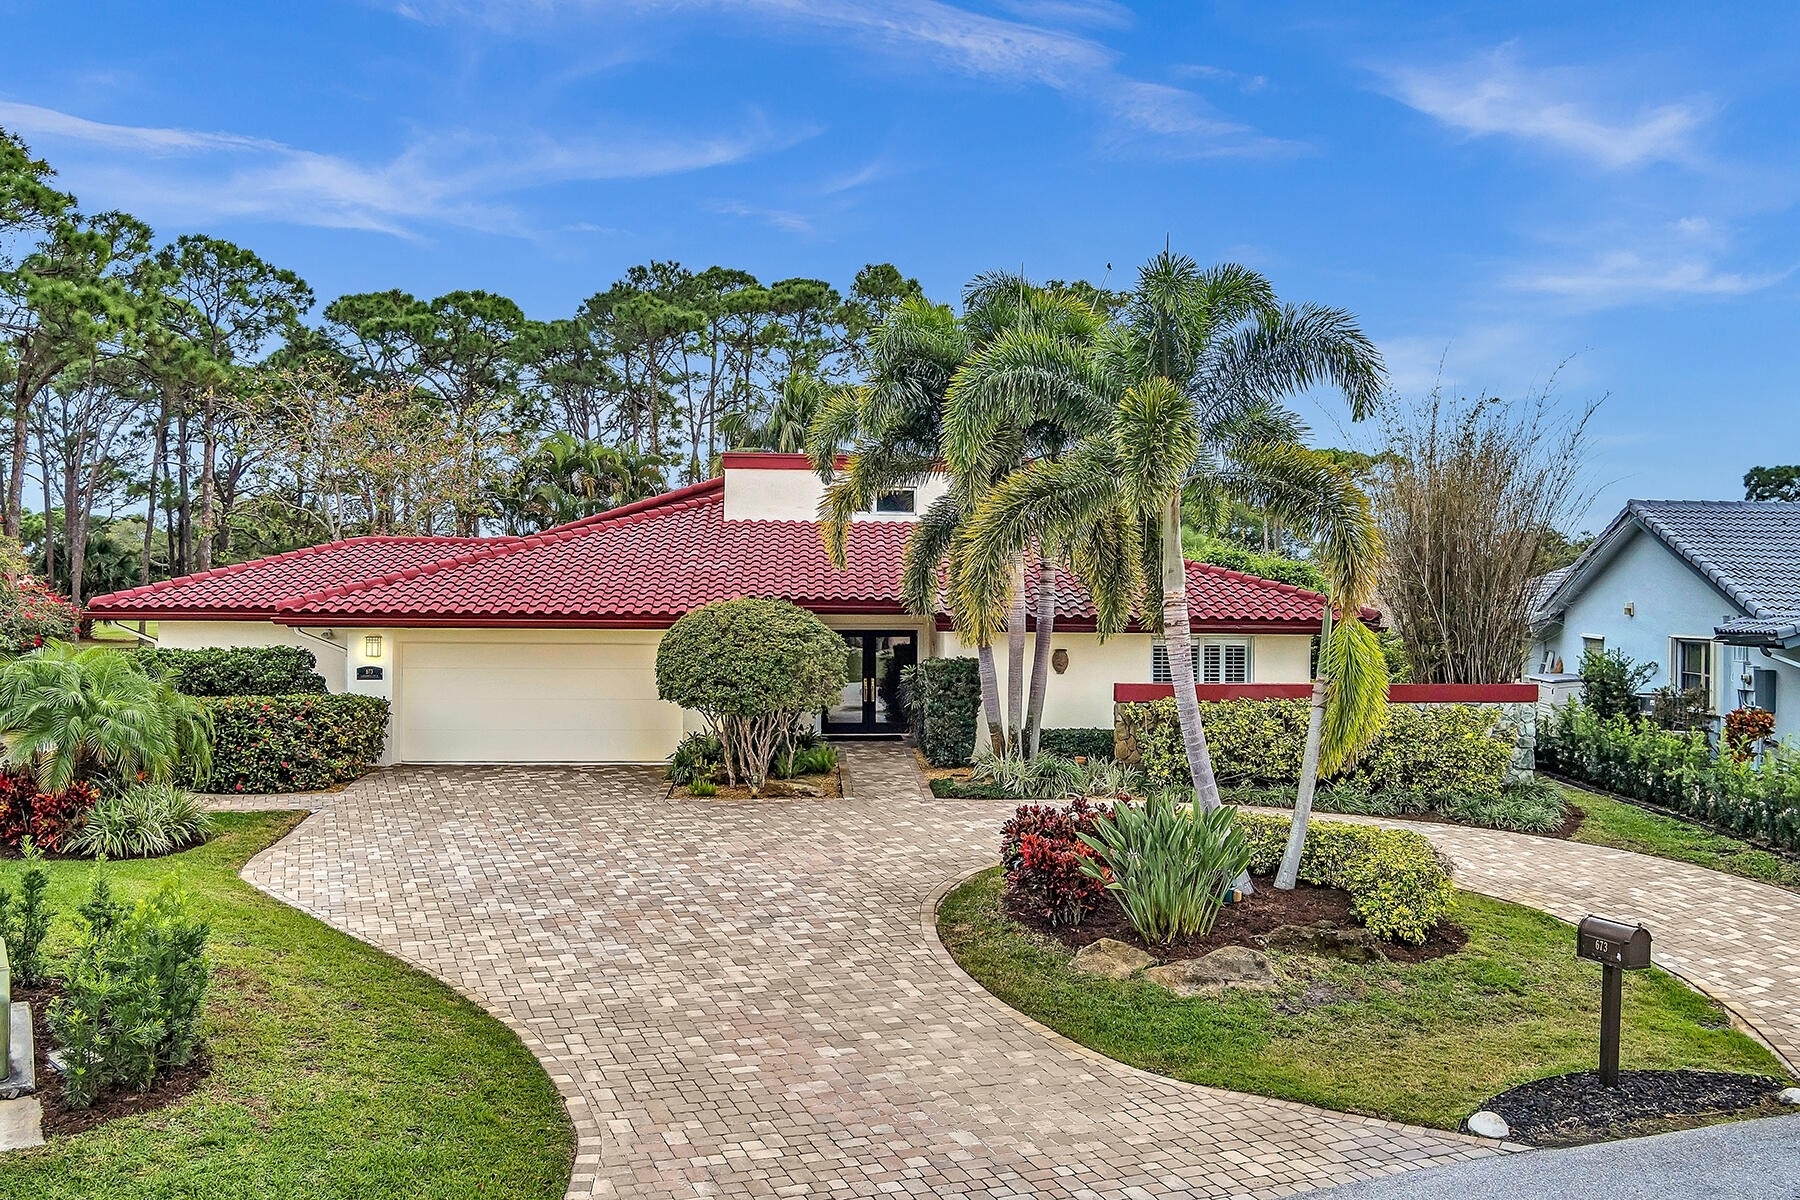 Single Family Home for Sale at The Hamlet, Delray Beach, FL 33445